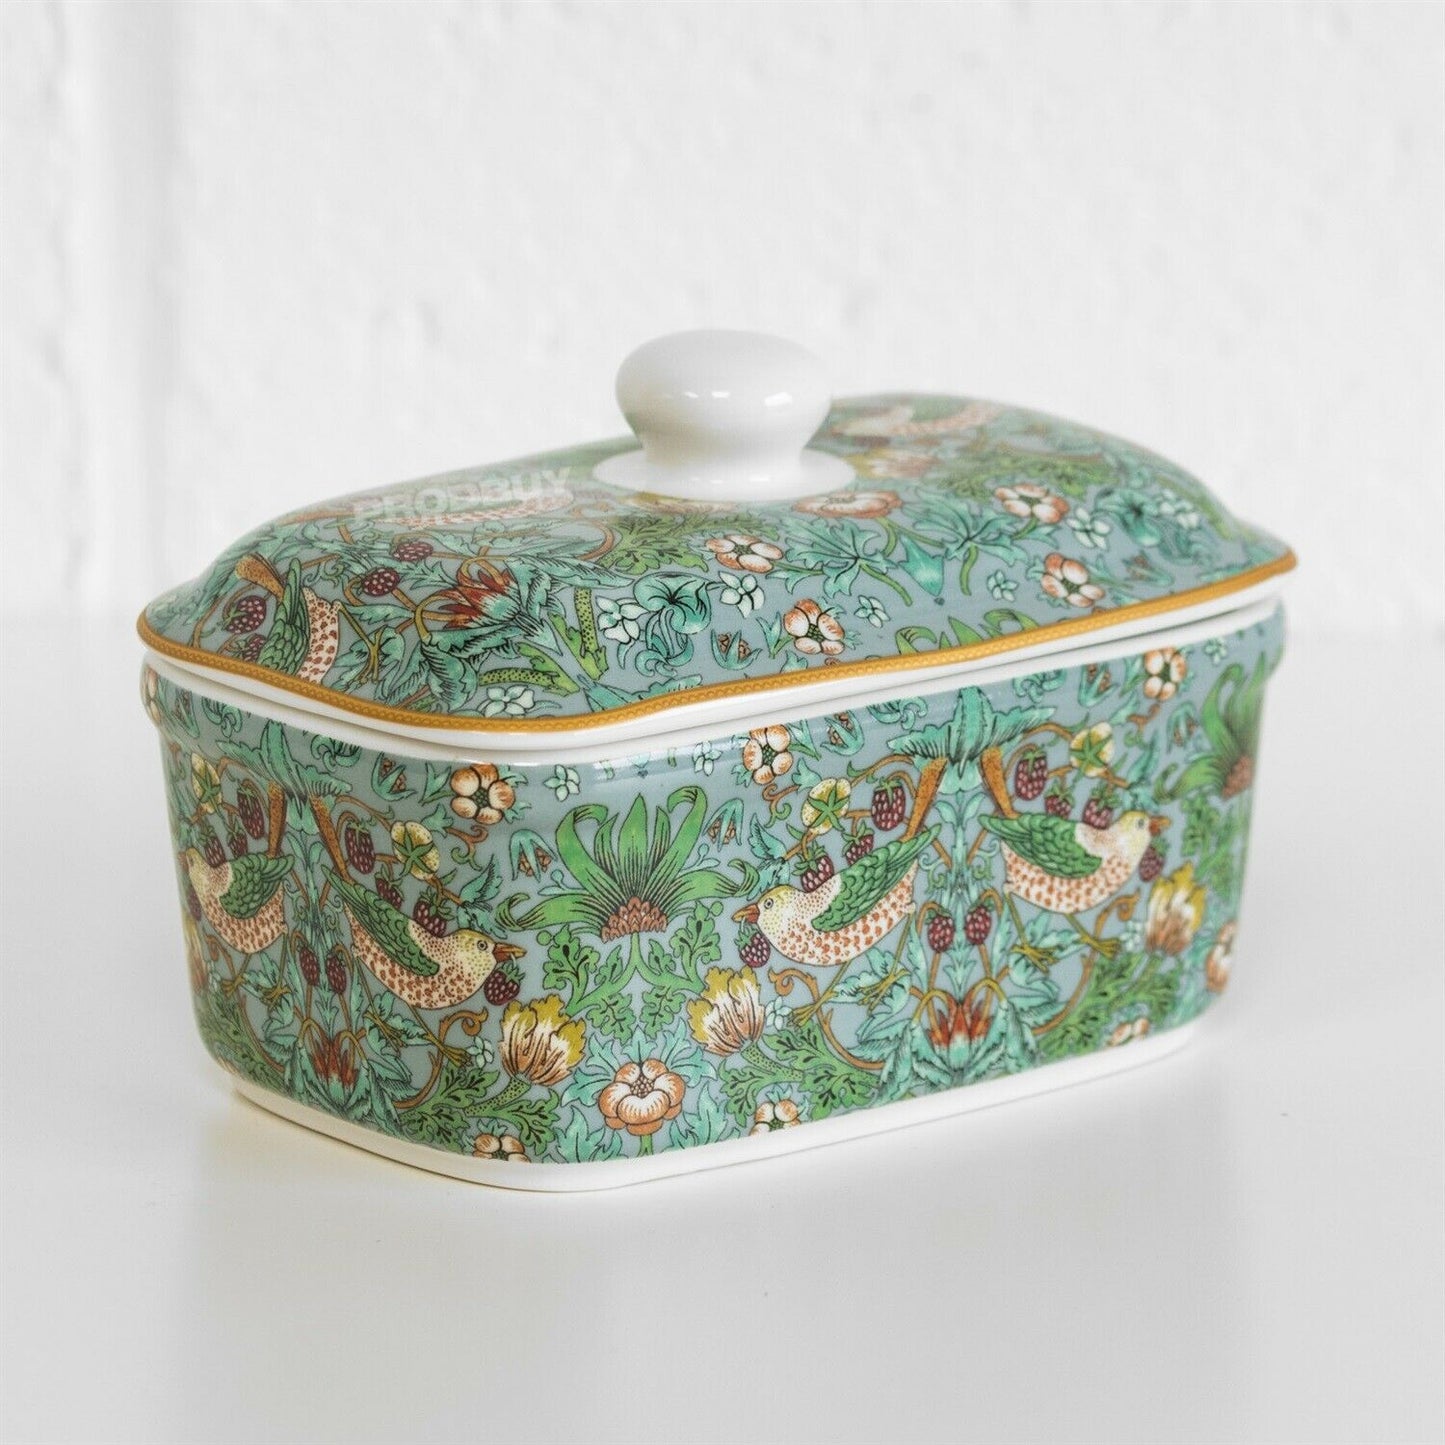 William Morris Teal Strawberry Thief Butter Dish